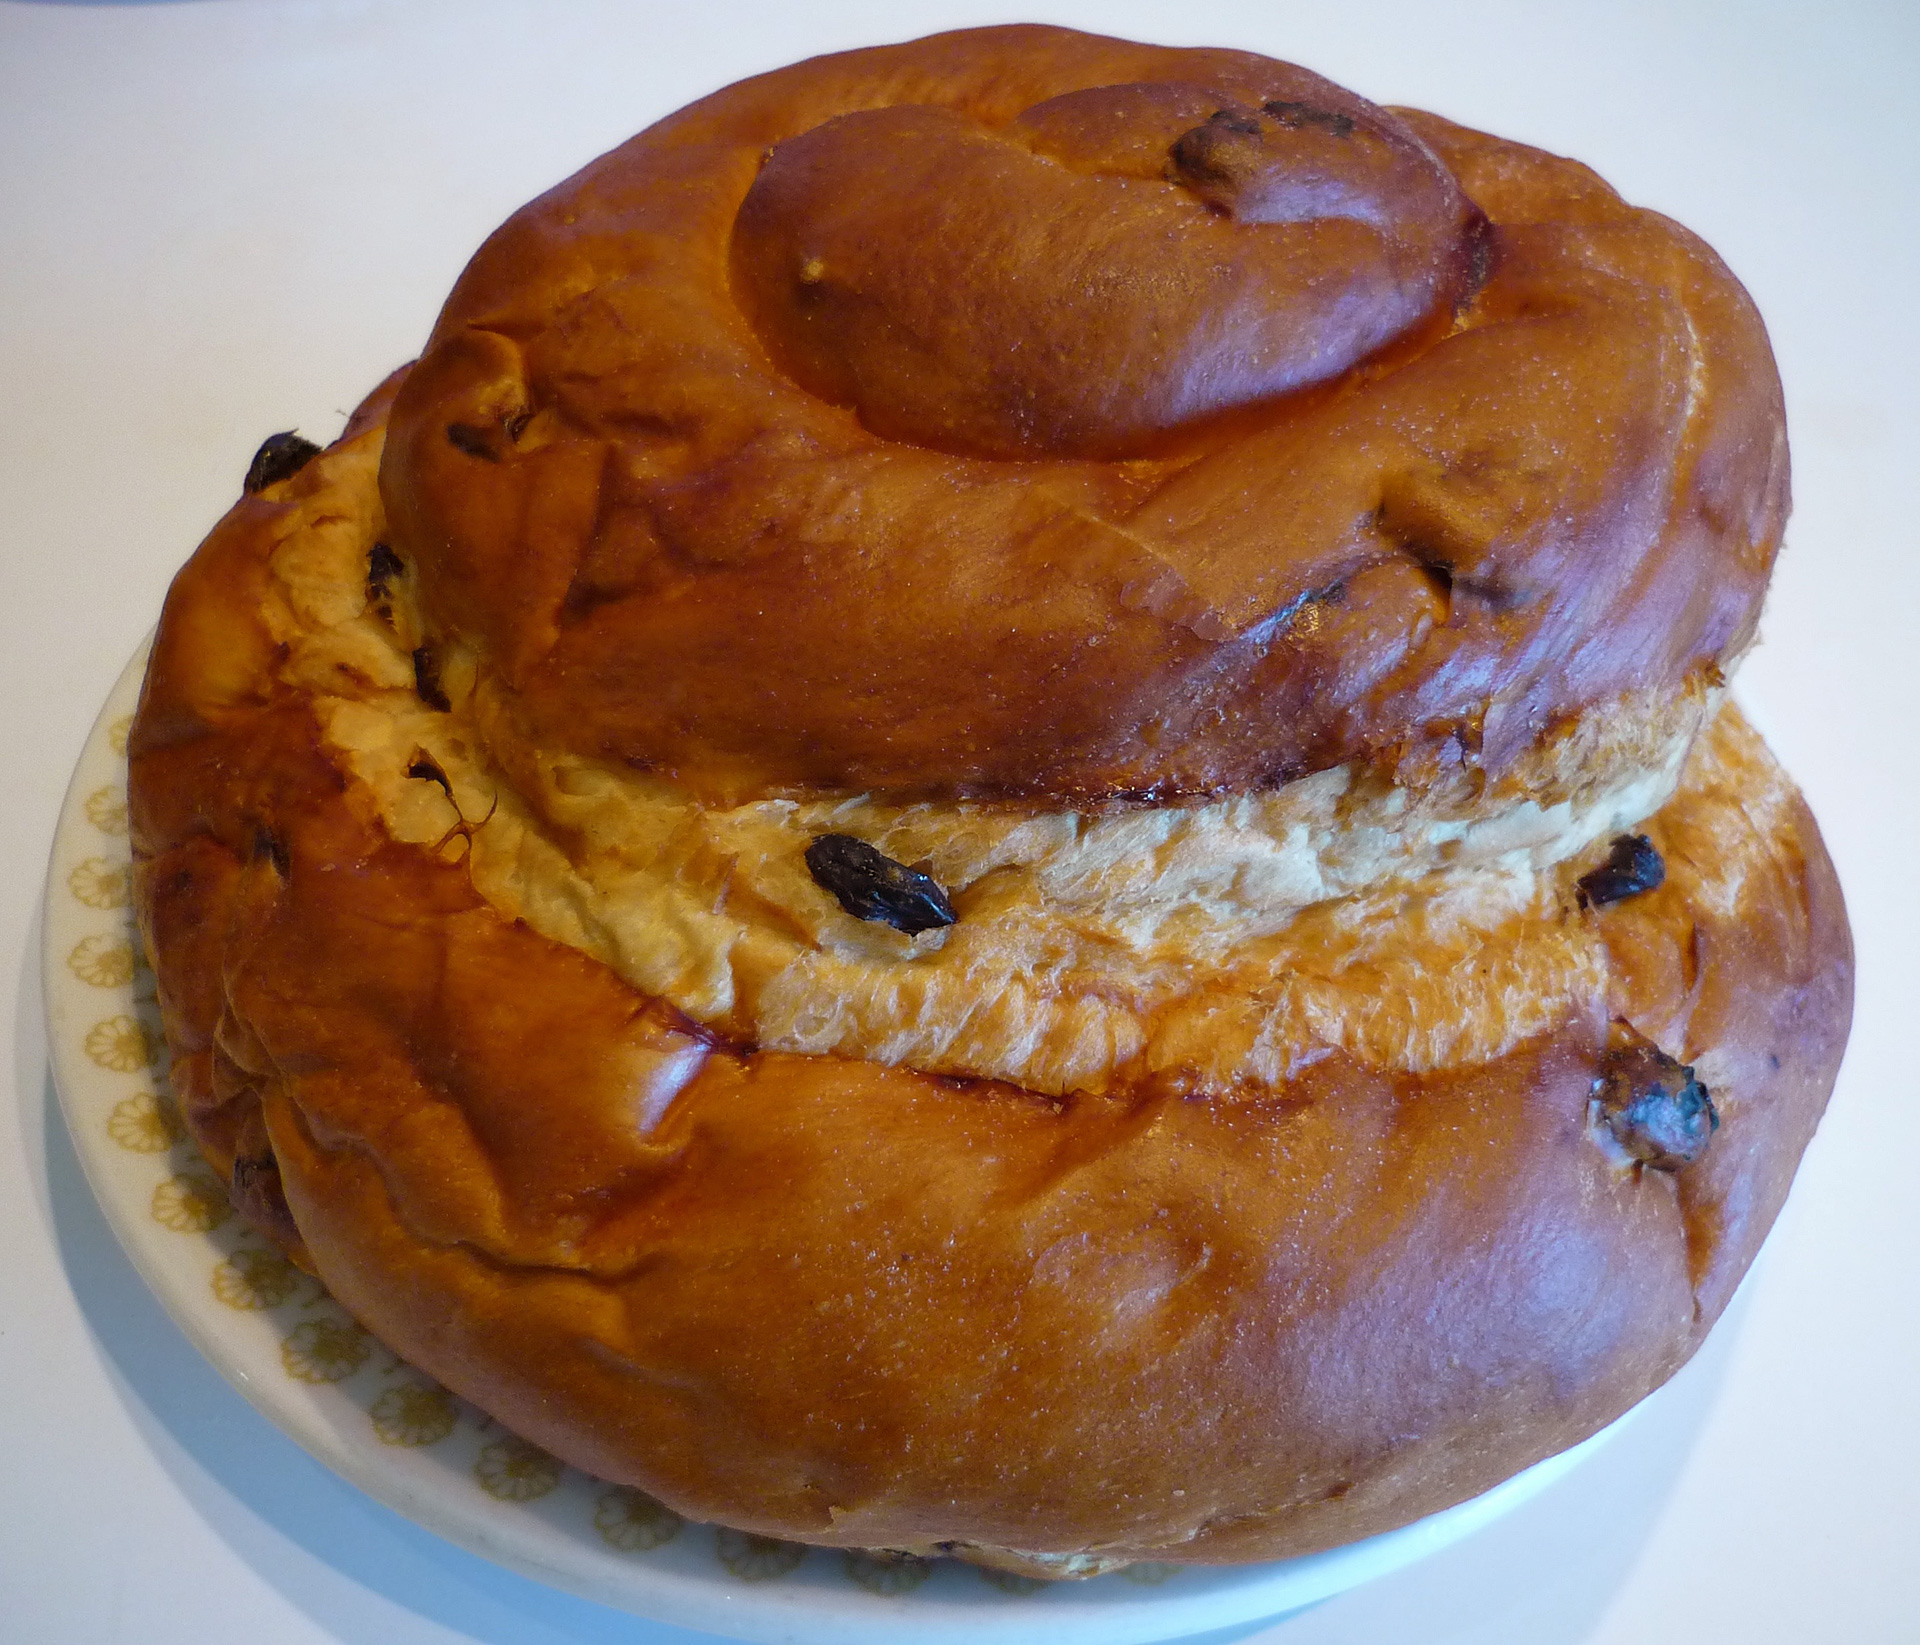 Acme turban challah with raisins (you can see why they call it a "turban")